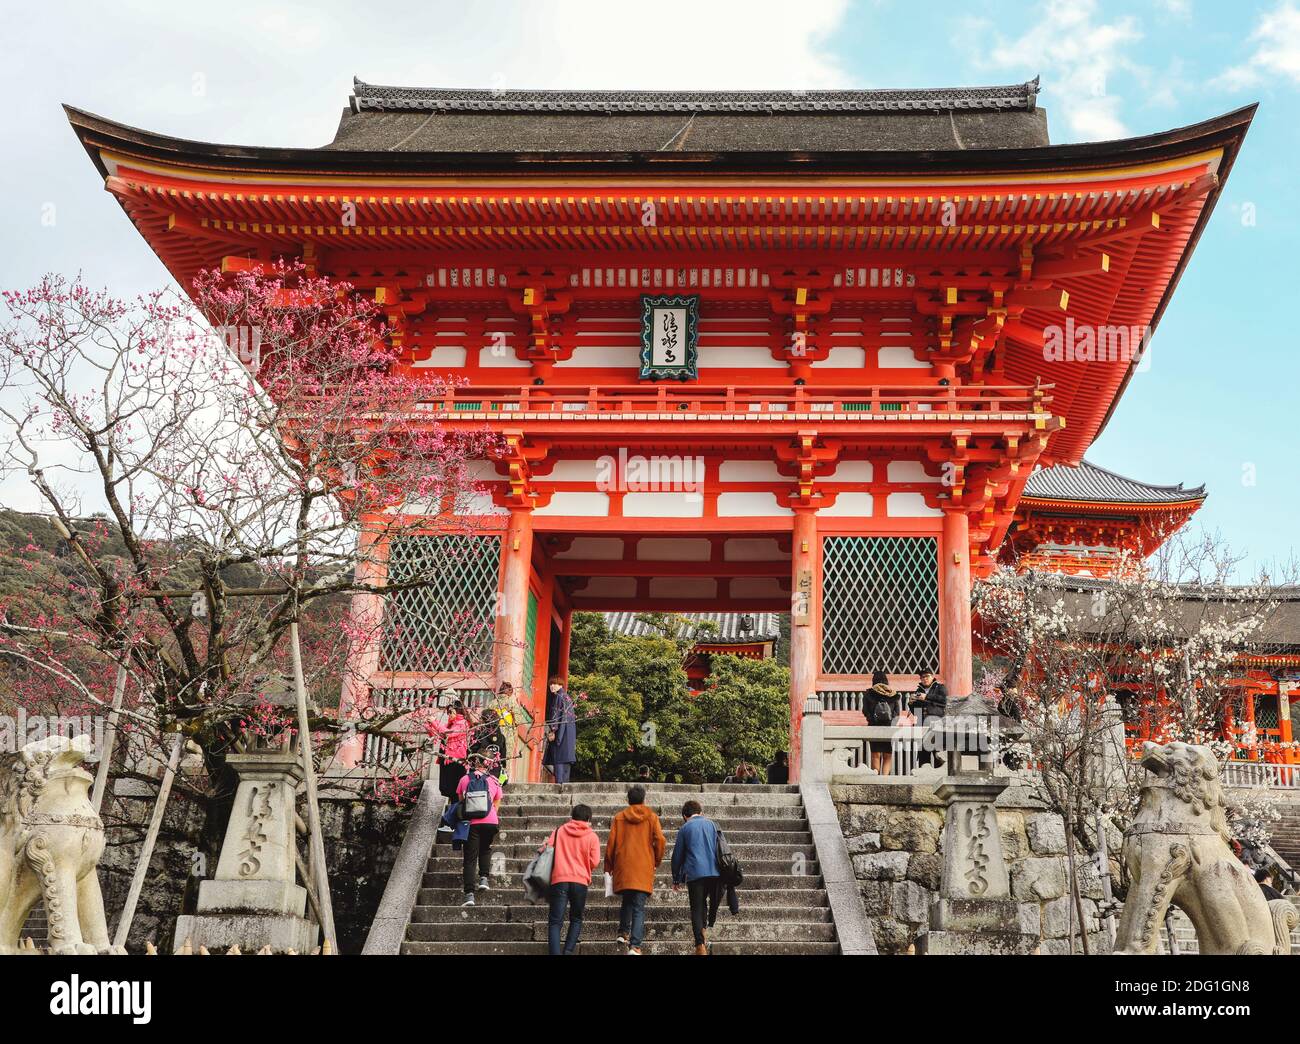 Front entrance gate with tourists of Kiyomizudera Temple in Kyoto, Japan Stock Photo